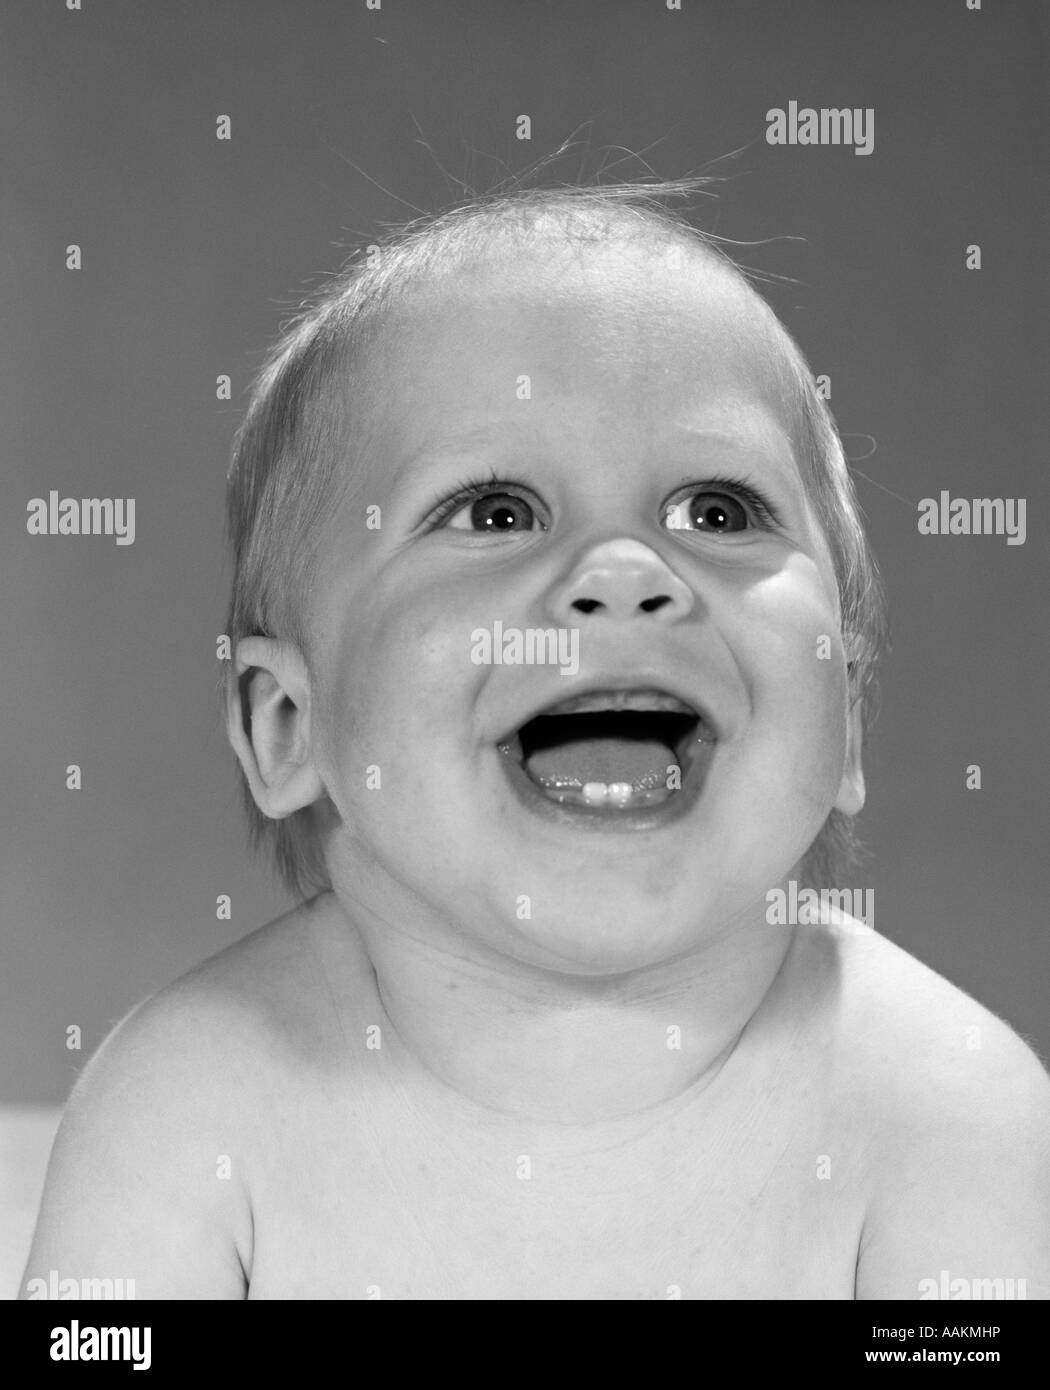 1960s PORTRAIT CLOSE-UP OF SMILING BABY BOY SHOWING FIRST TWO TEETH IN BOTTOM GUMS Stock Photo